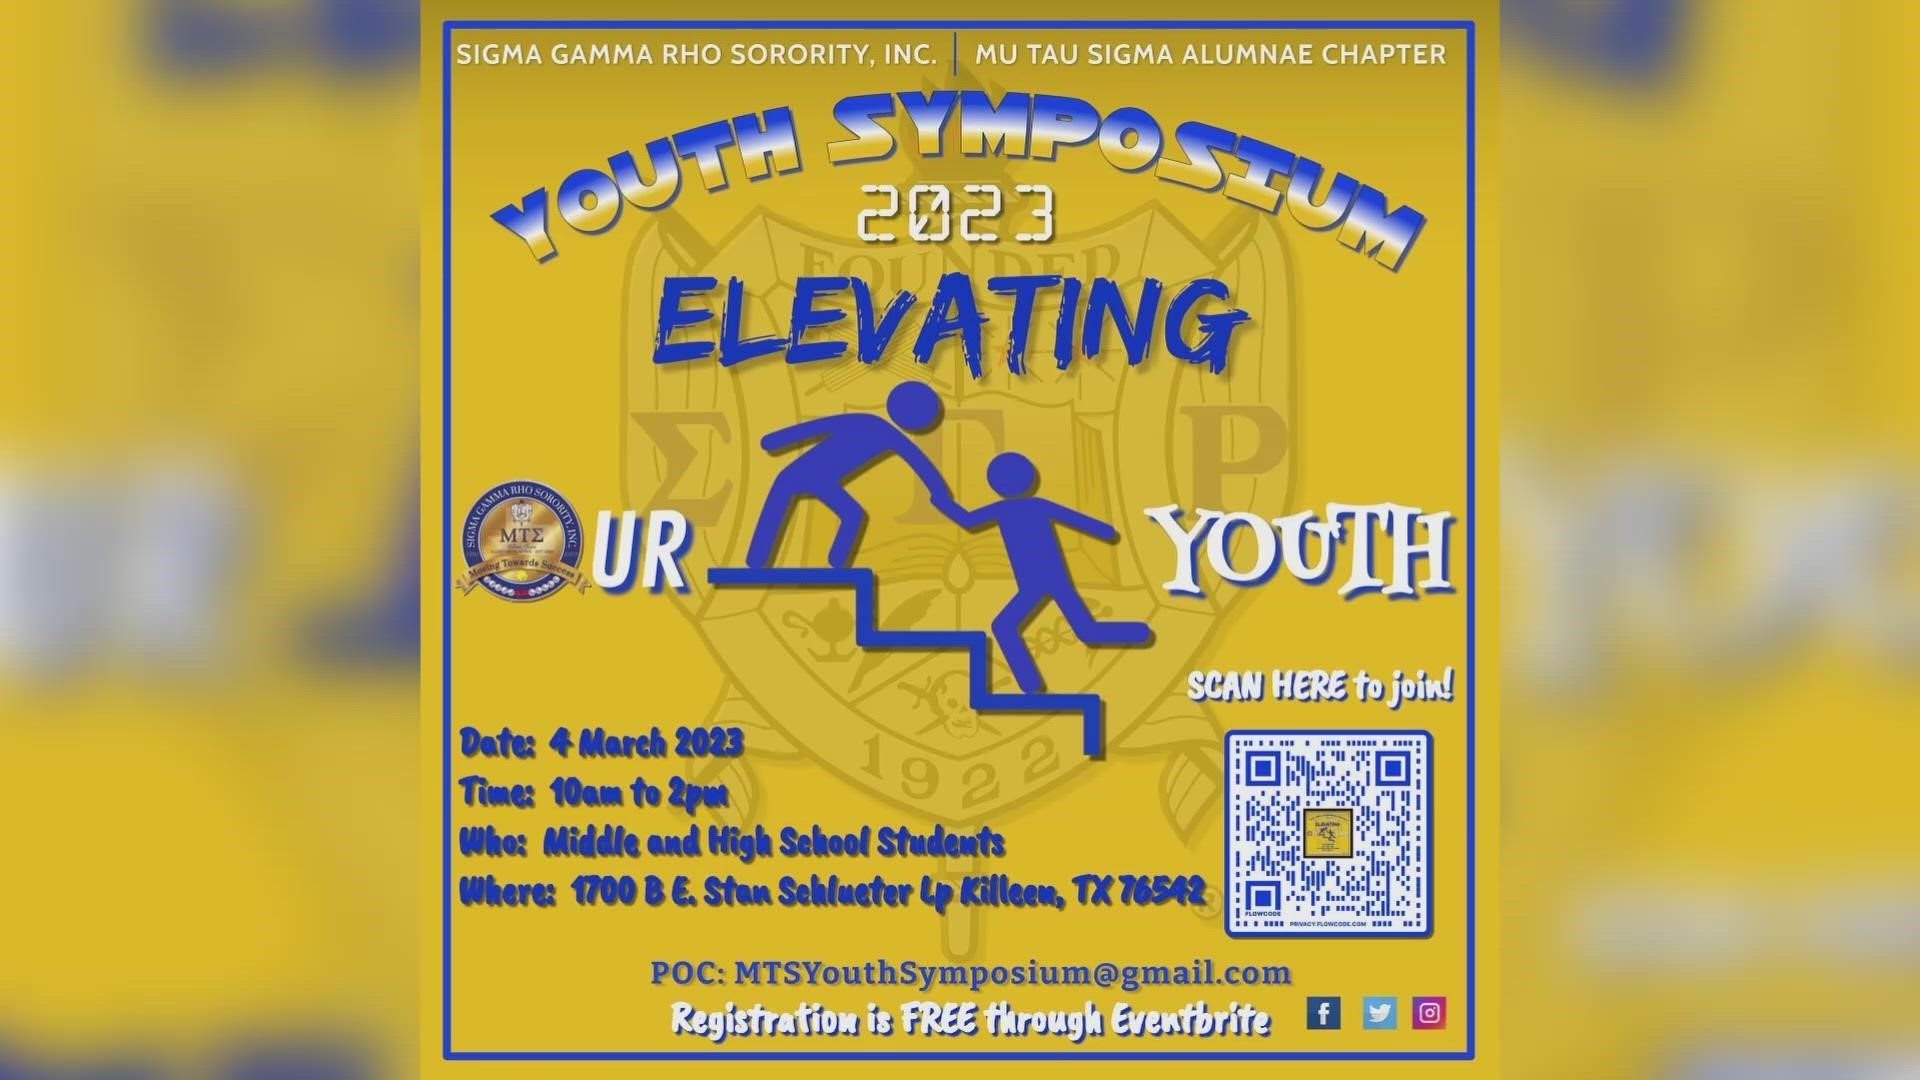 The Mu Tau Sigma Chapter of Sigma Gamma Rho Sorority Inc. will be hosting its Youth Symposium on March 4.